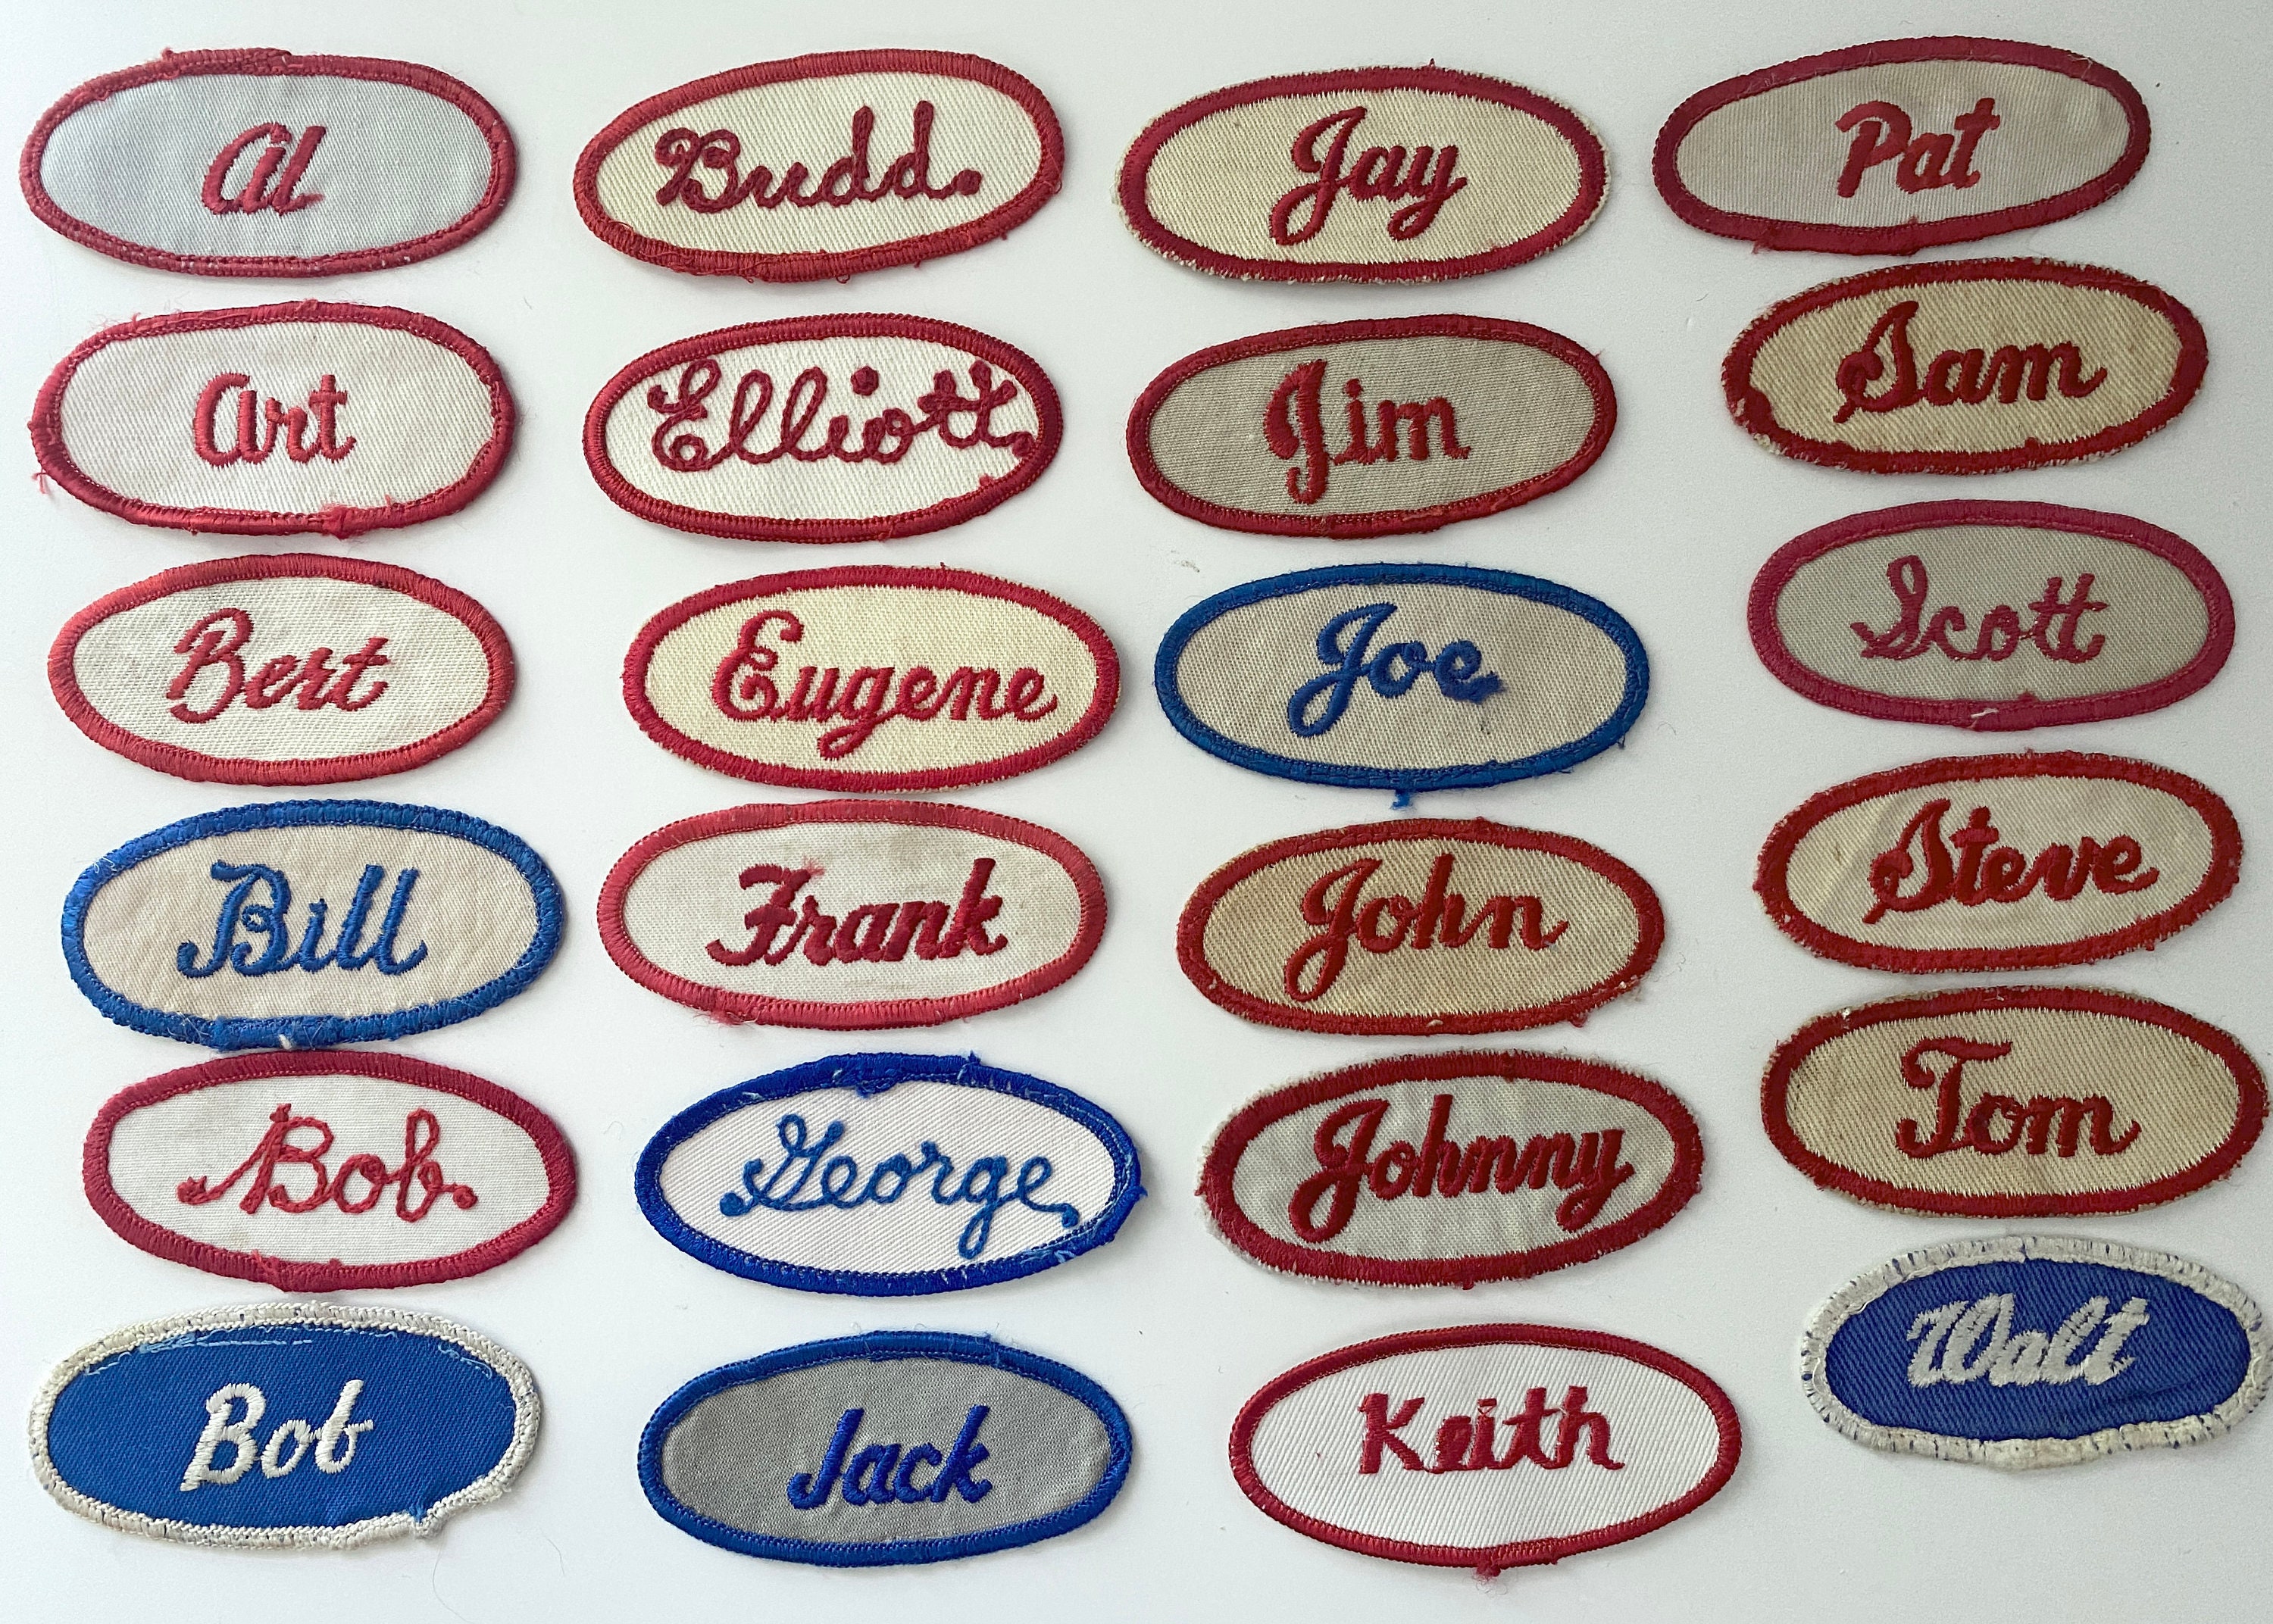 Retro Embroidered Name Patch, Vintage Style Name Patch, Custom